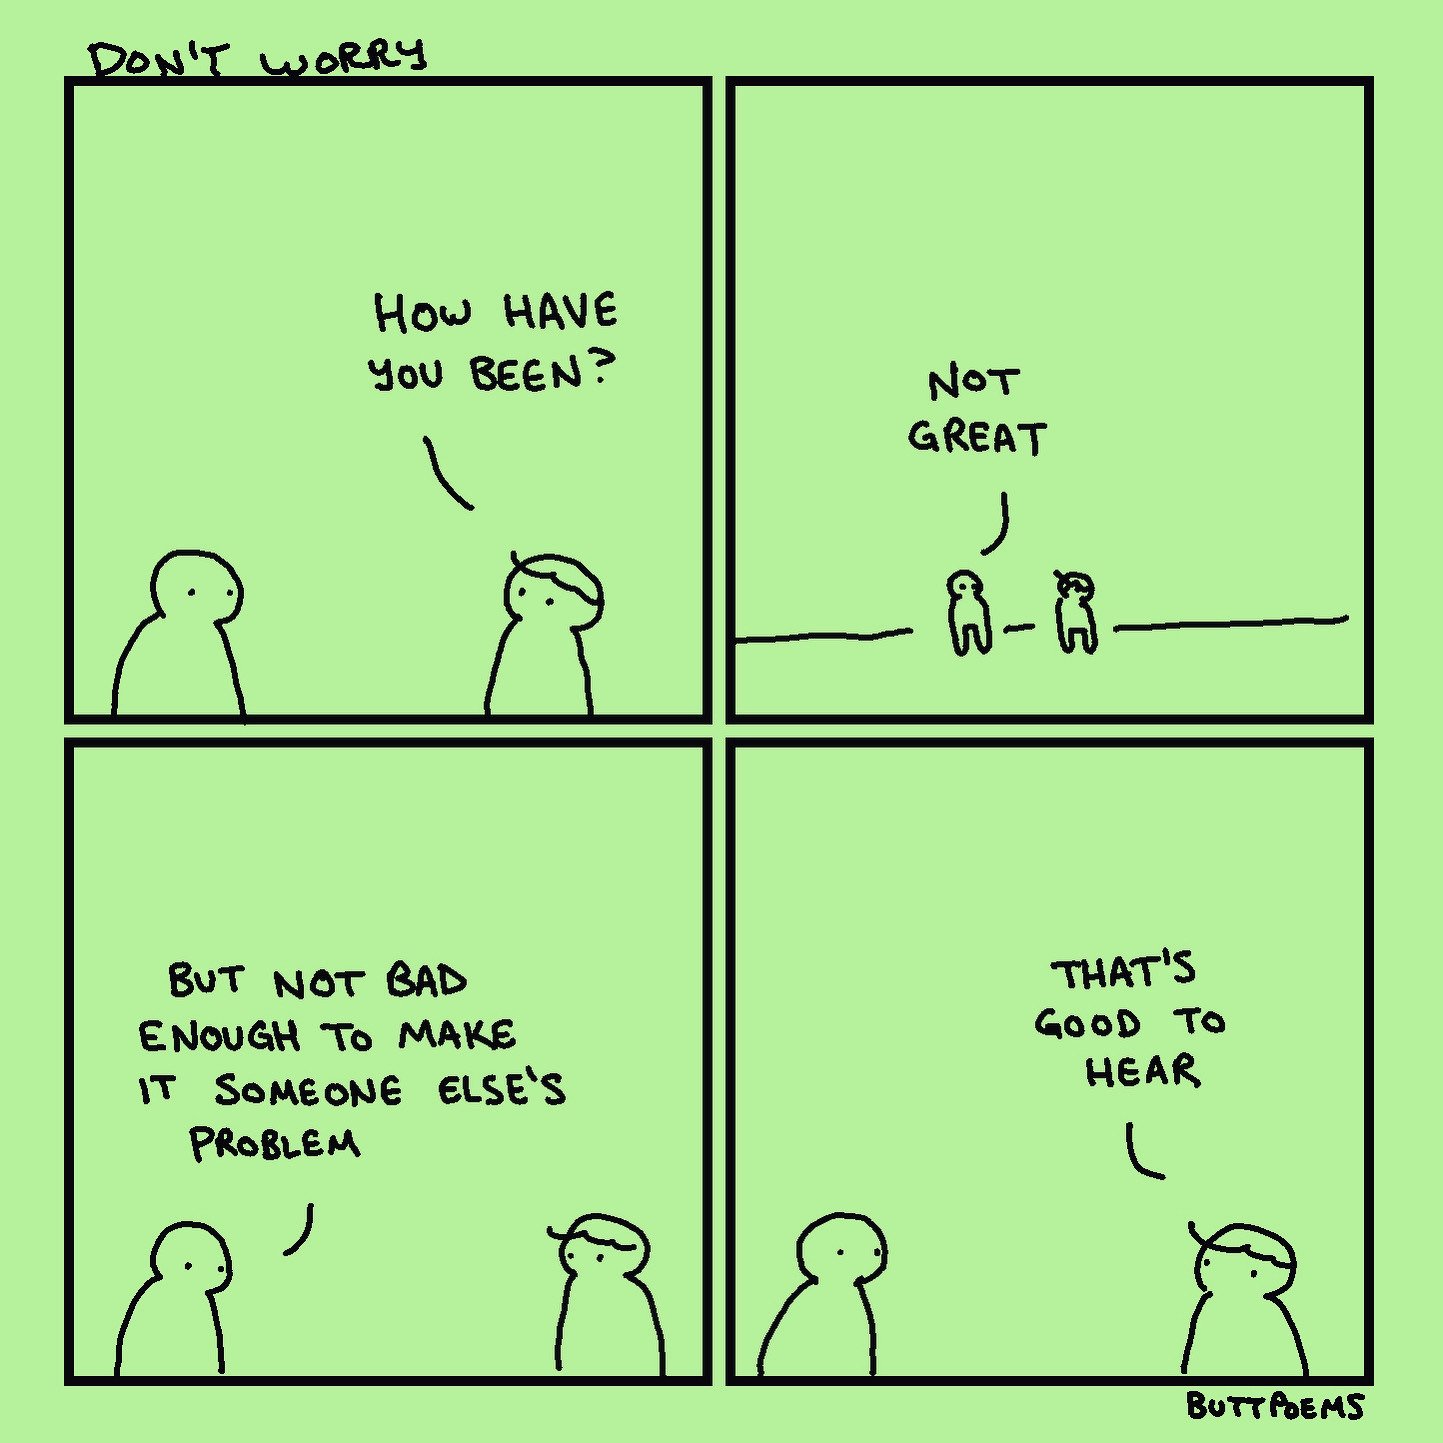 four panel comic with two people in each panel. Panel 1: Second person asks "How have you been?". Panel 2: First person says "Not Great". Panel 3: First person adds "But not bad enough to make it someone else's problem". Panel 4: Second person says "That's good to hear".